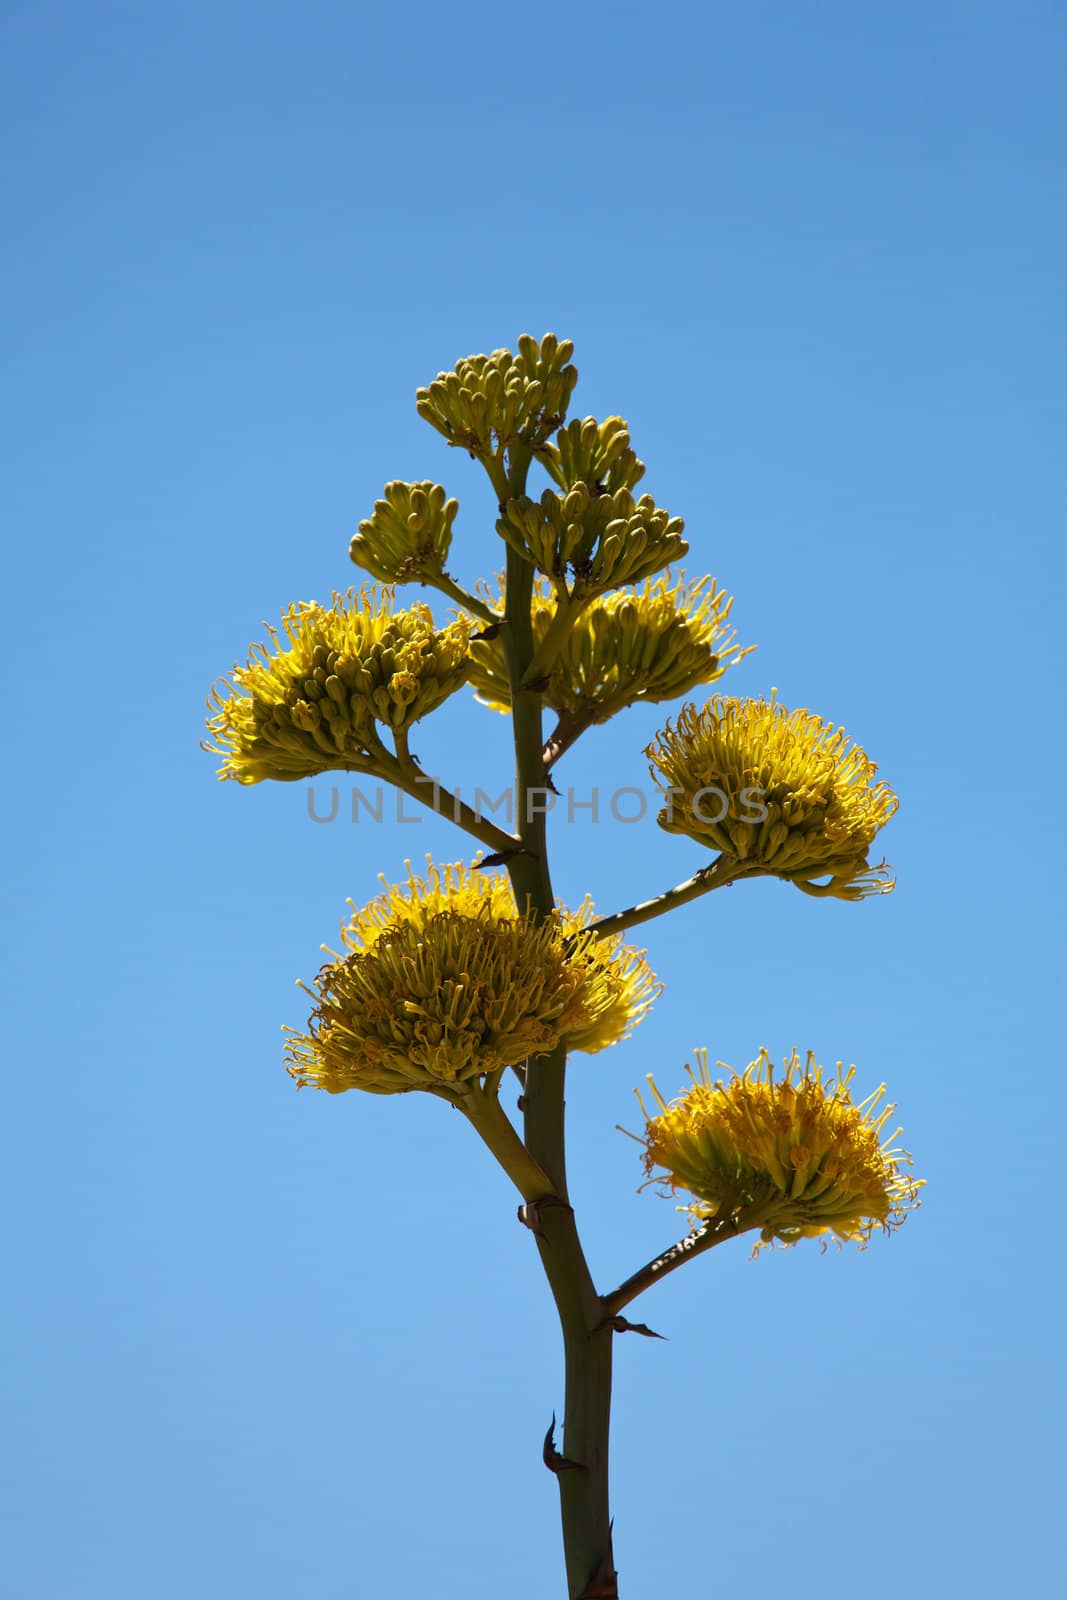 Member of Agave family, Parry's agave bloom once in their life about every 25 years